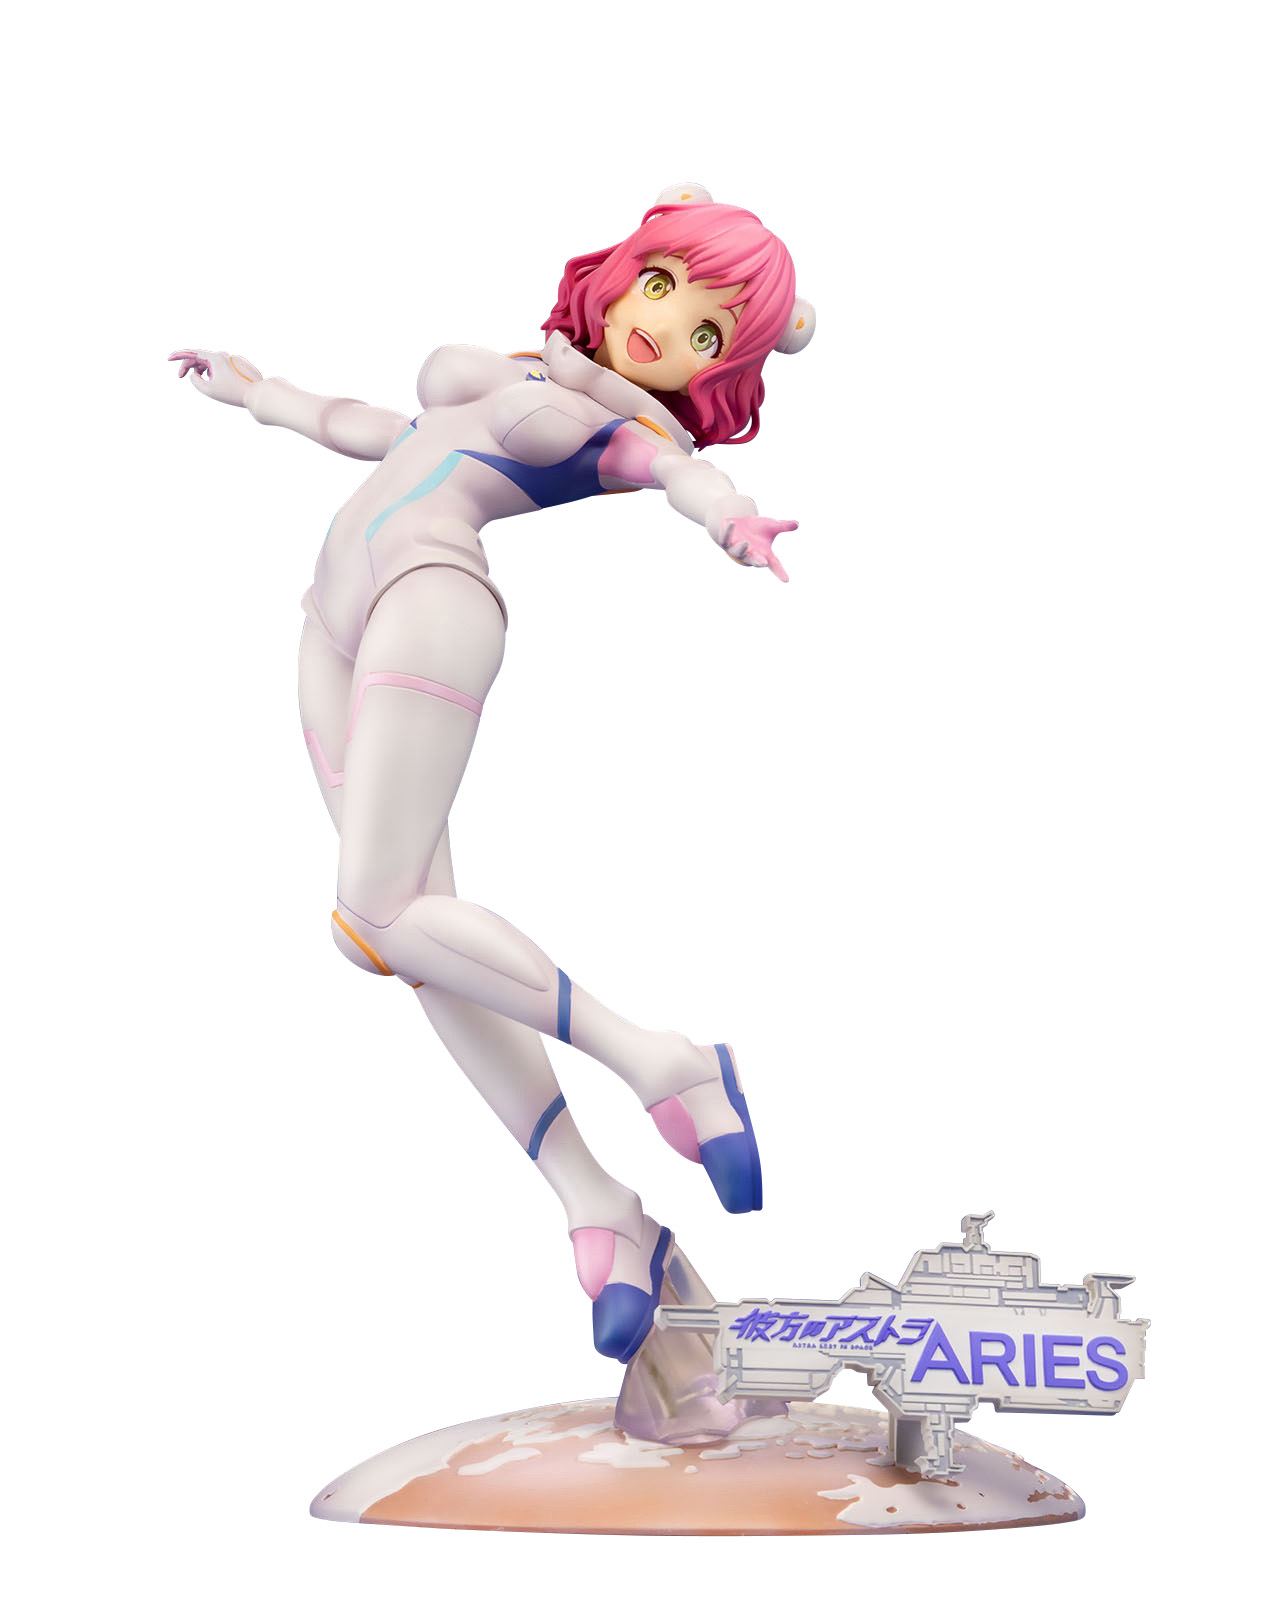 ASTRA LOST IN SPACE 1/7 SCALE PRE-PAINTED FIGURE: ARIES SPRING B'full Fots Japan